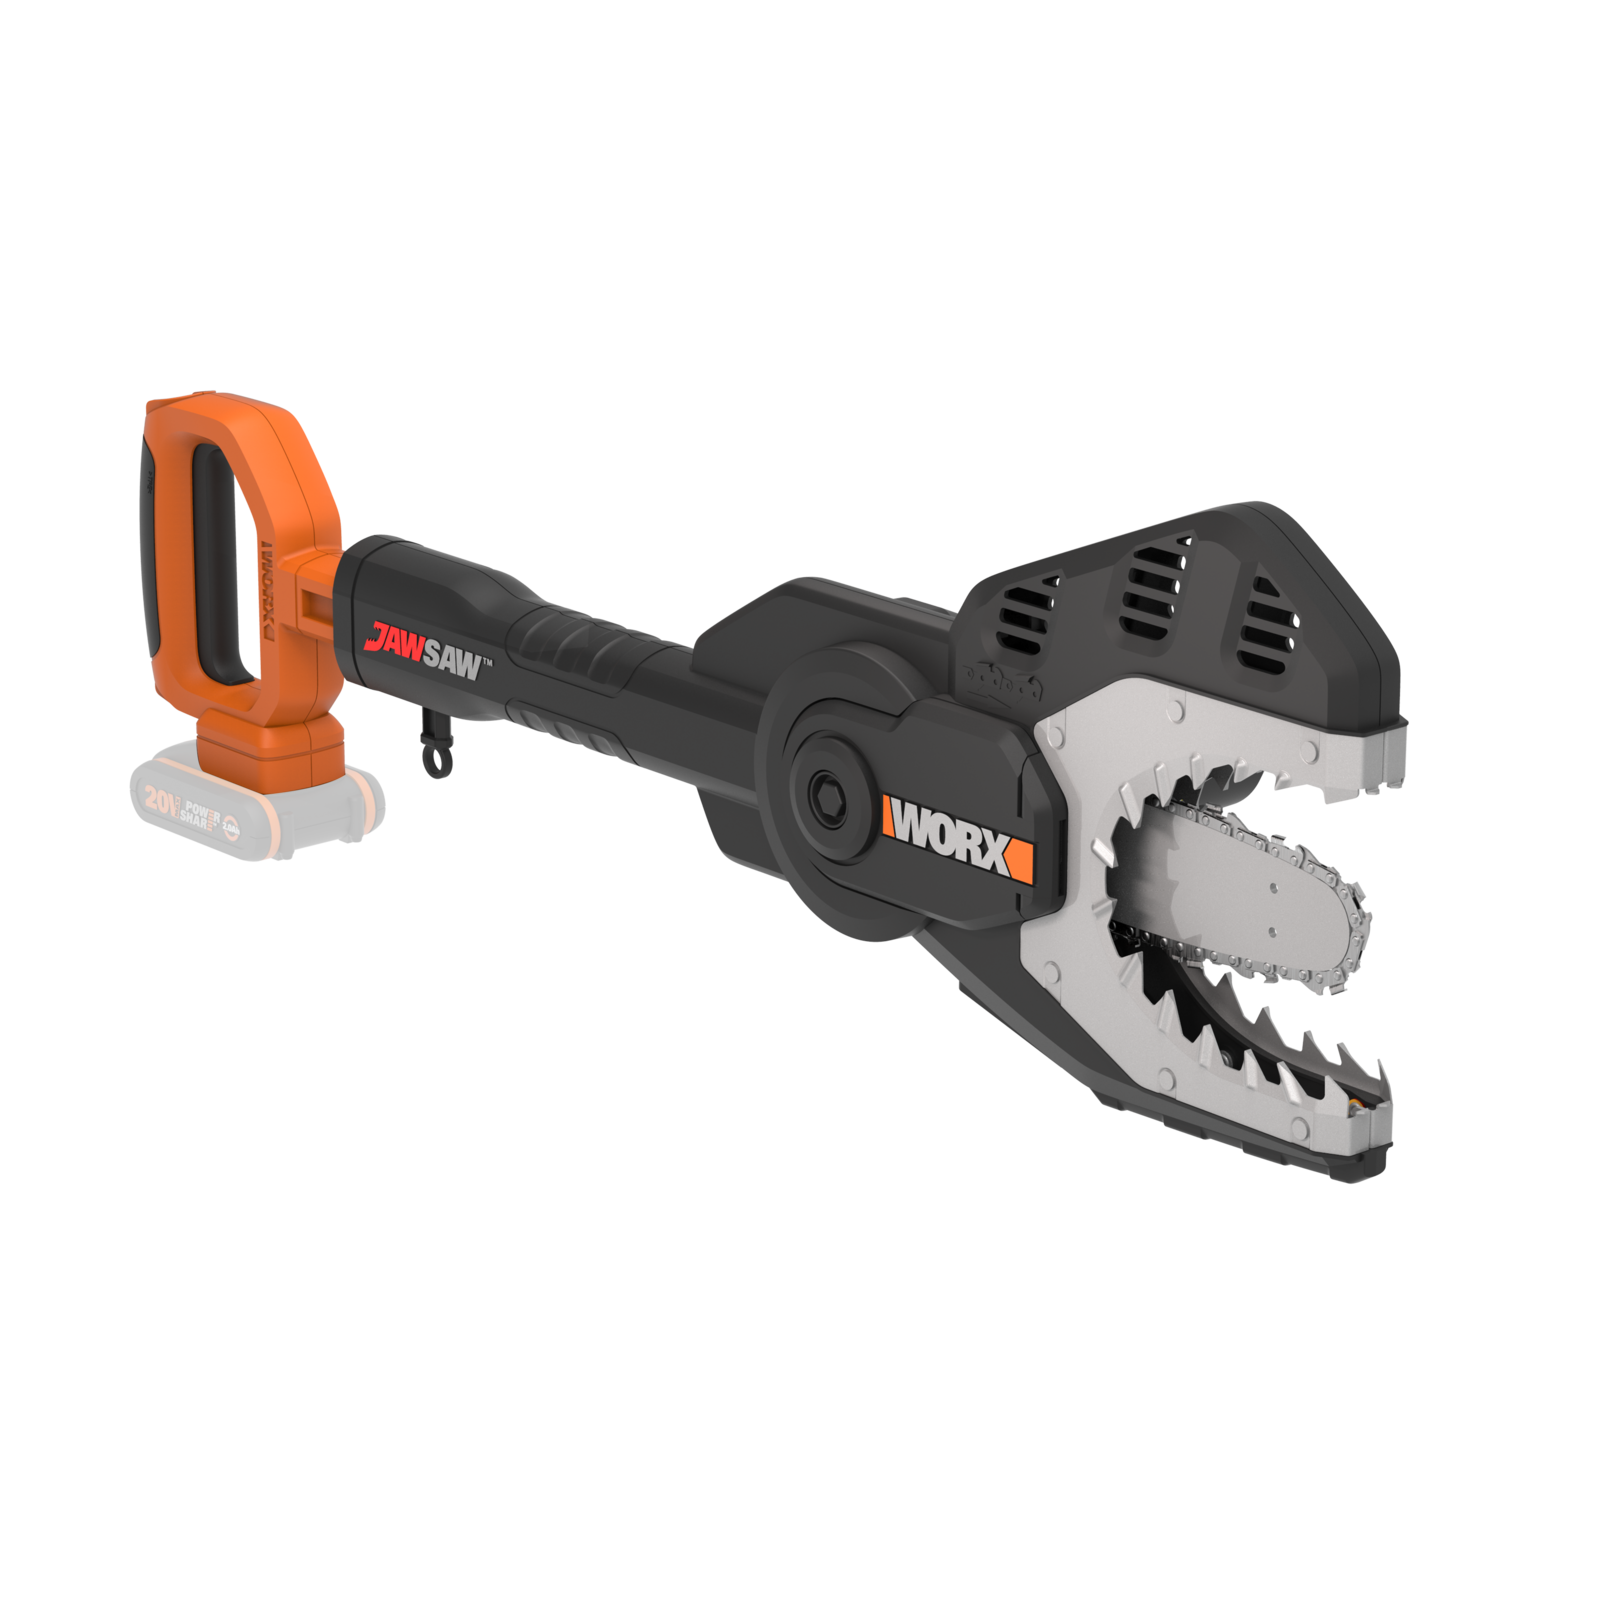 WORX 20V Cordless JAWSAW 15cm Chainsaw Skin (POWERSHARE Battery / Charger not incl.) - WG329E.9